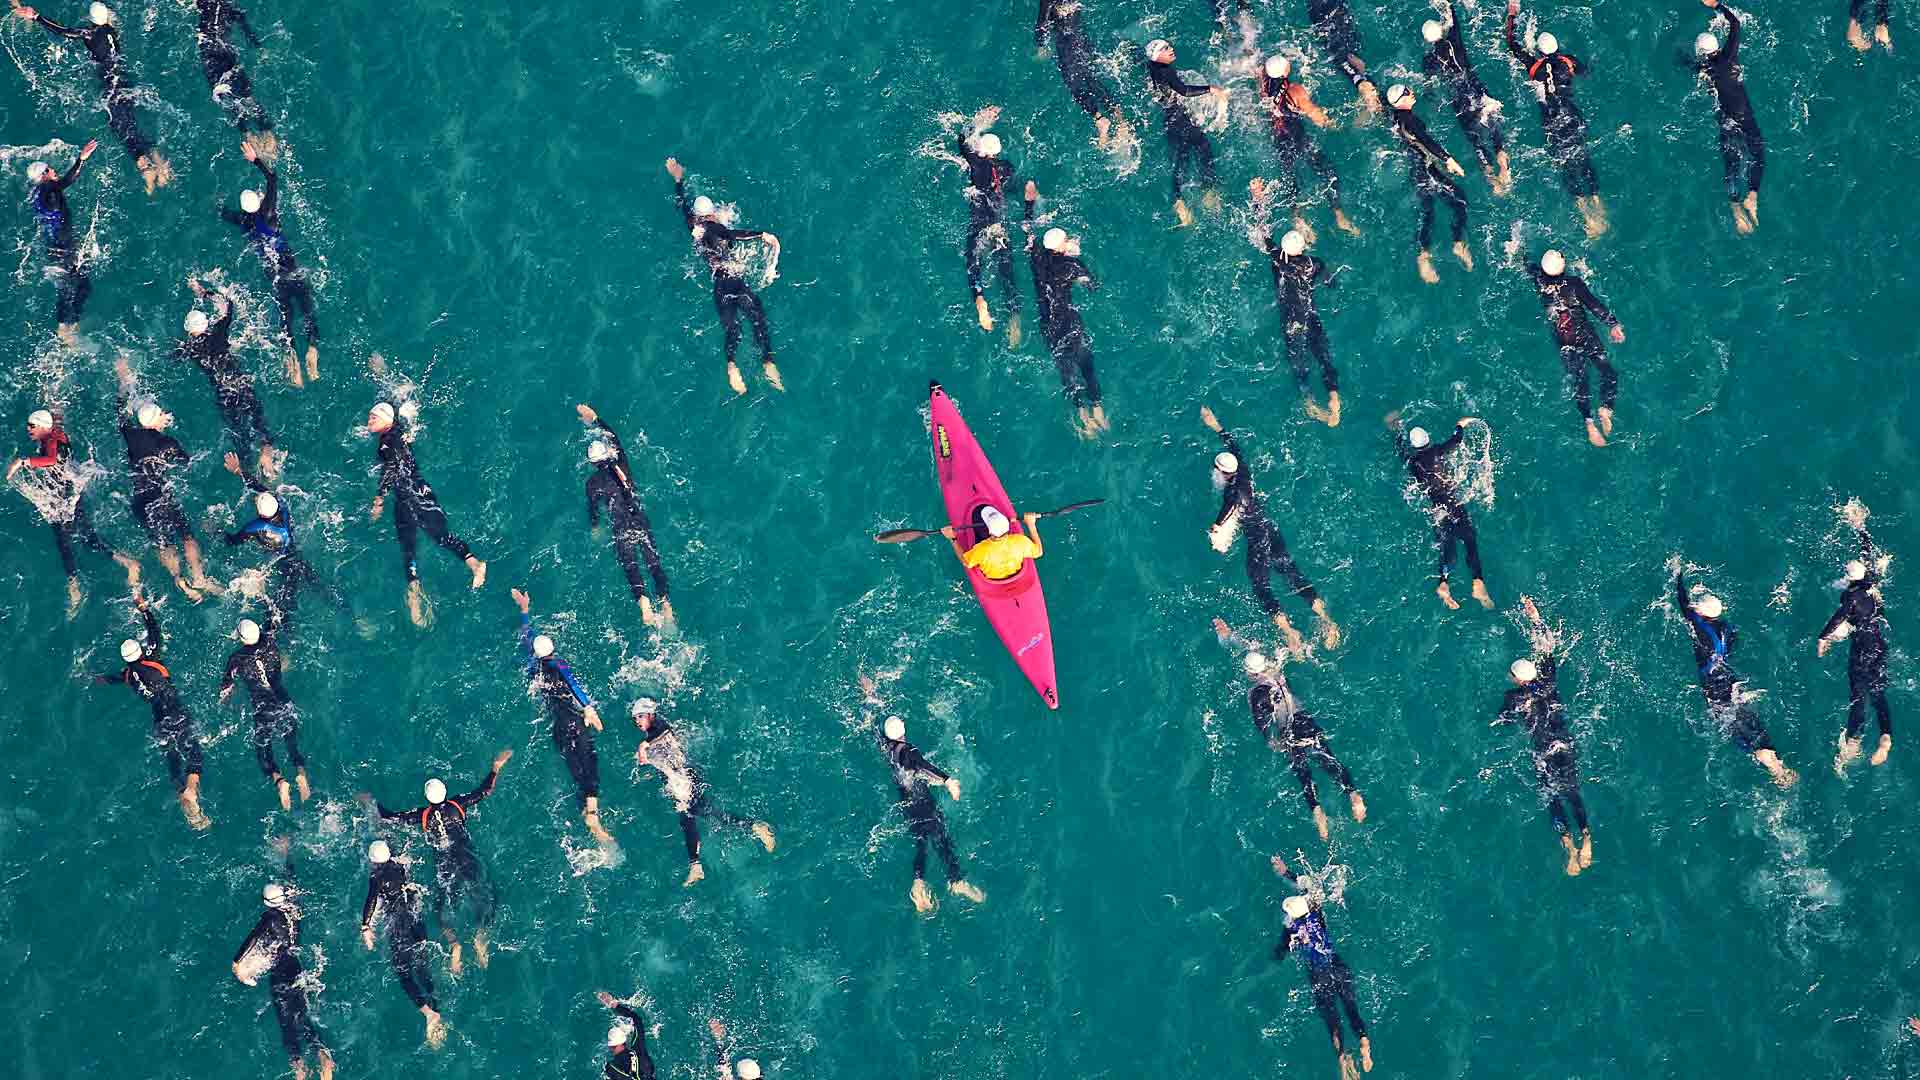 Red canoe pictured from above, surrounded by people swimming in the ocean, intended to symbolise the idea of standign out from the crowd.